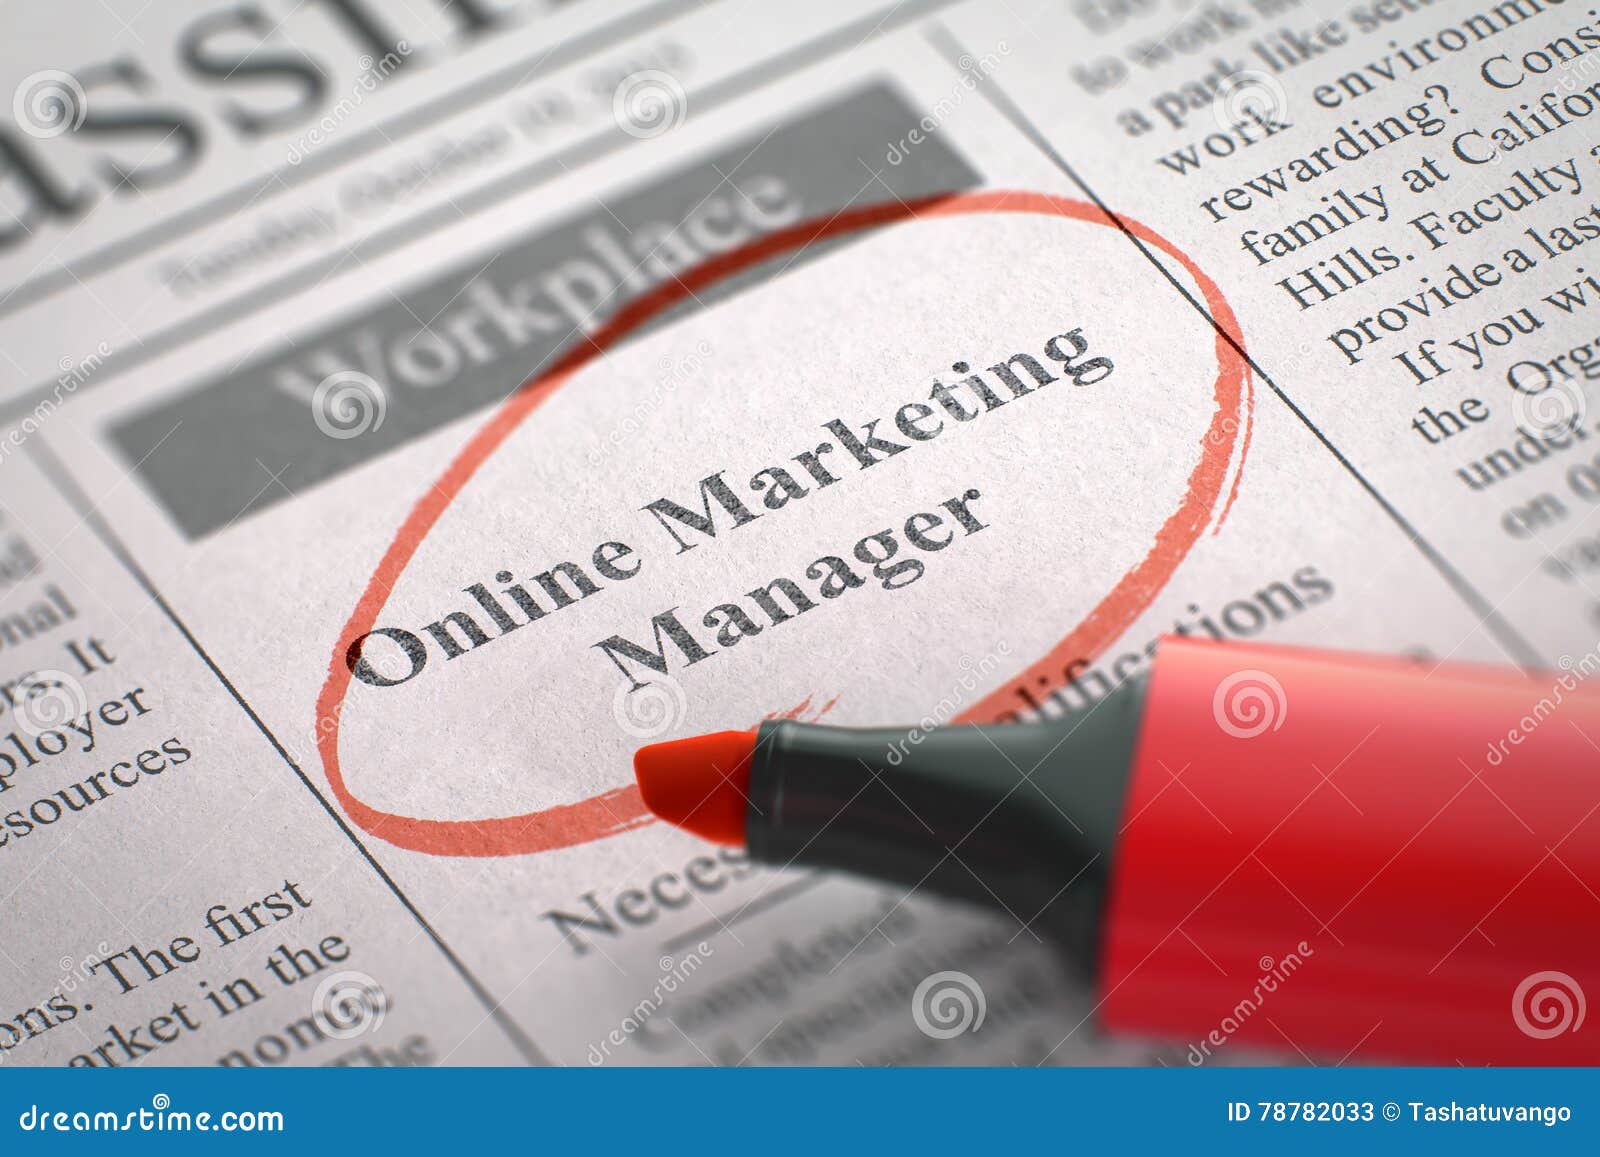 Job Opening Online Marketing Manager. 3D. Stock Image ...